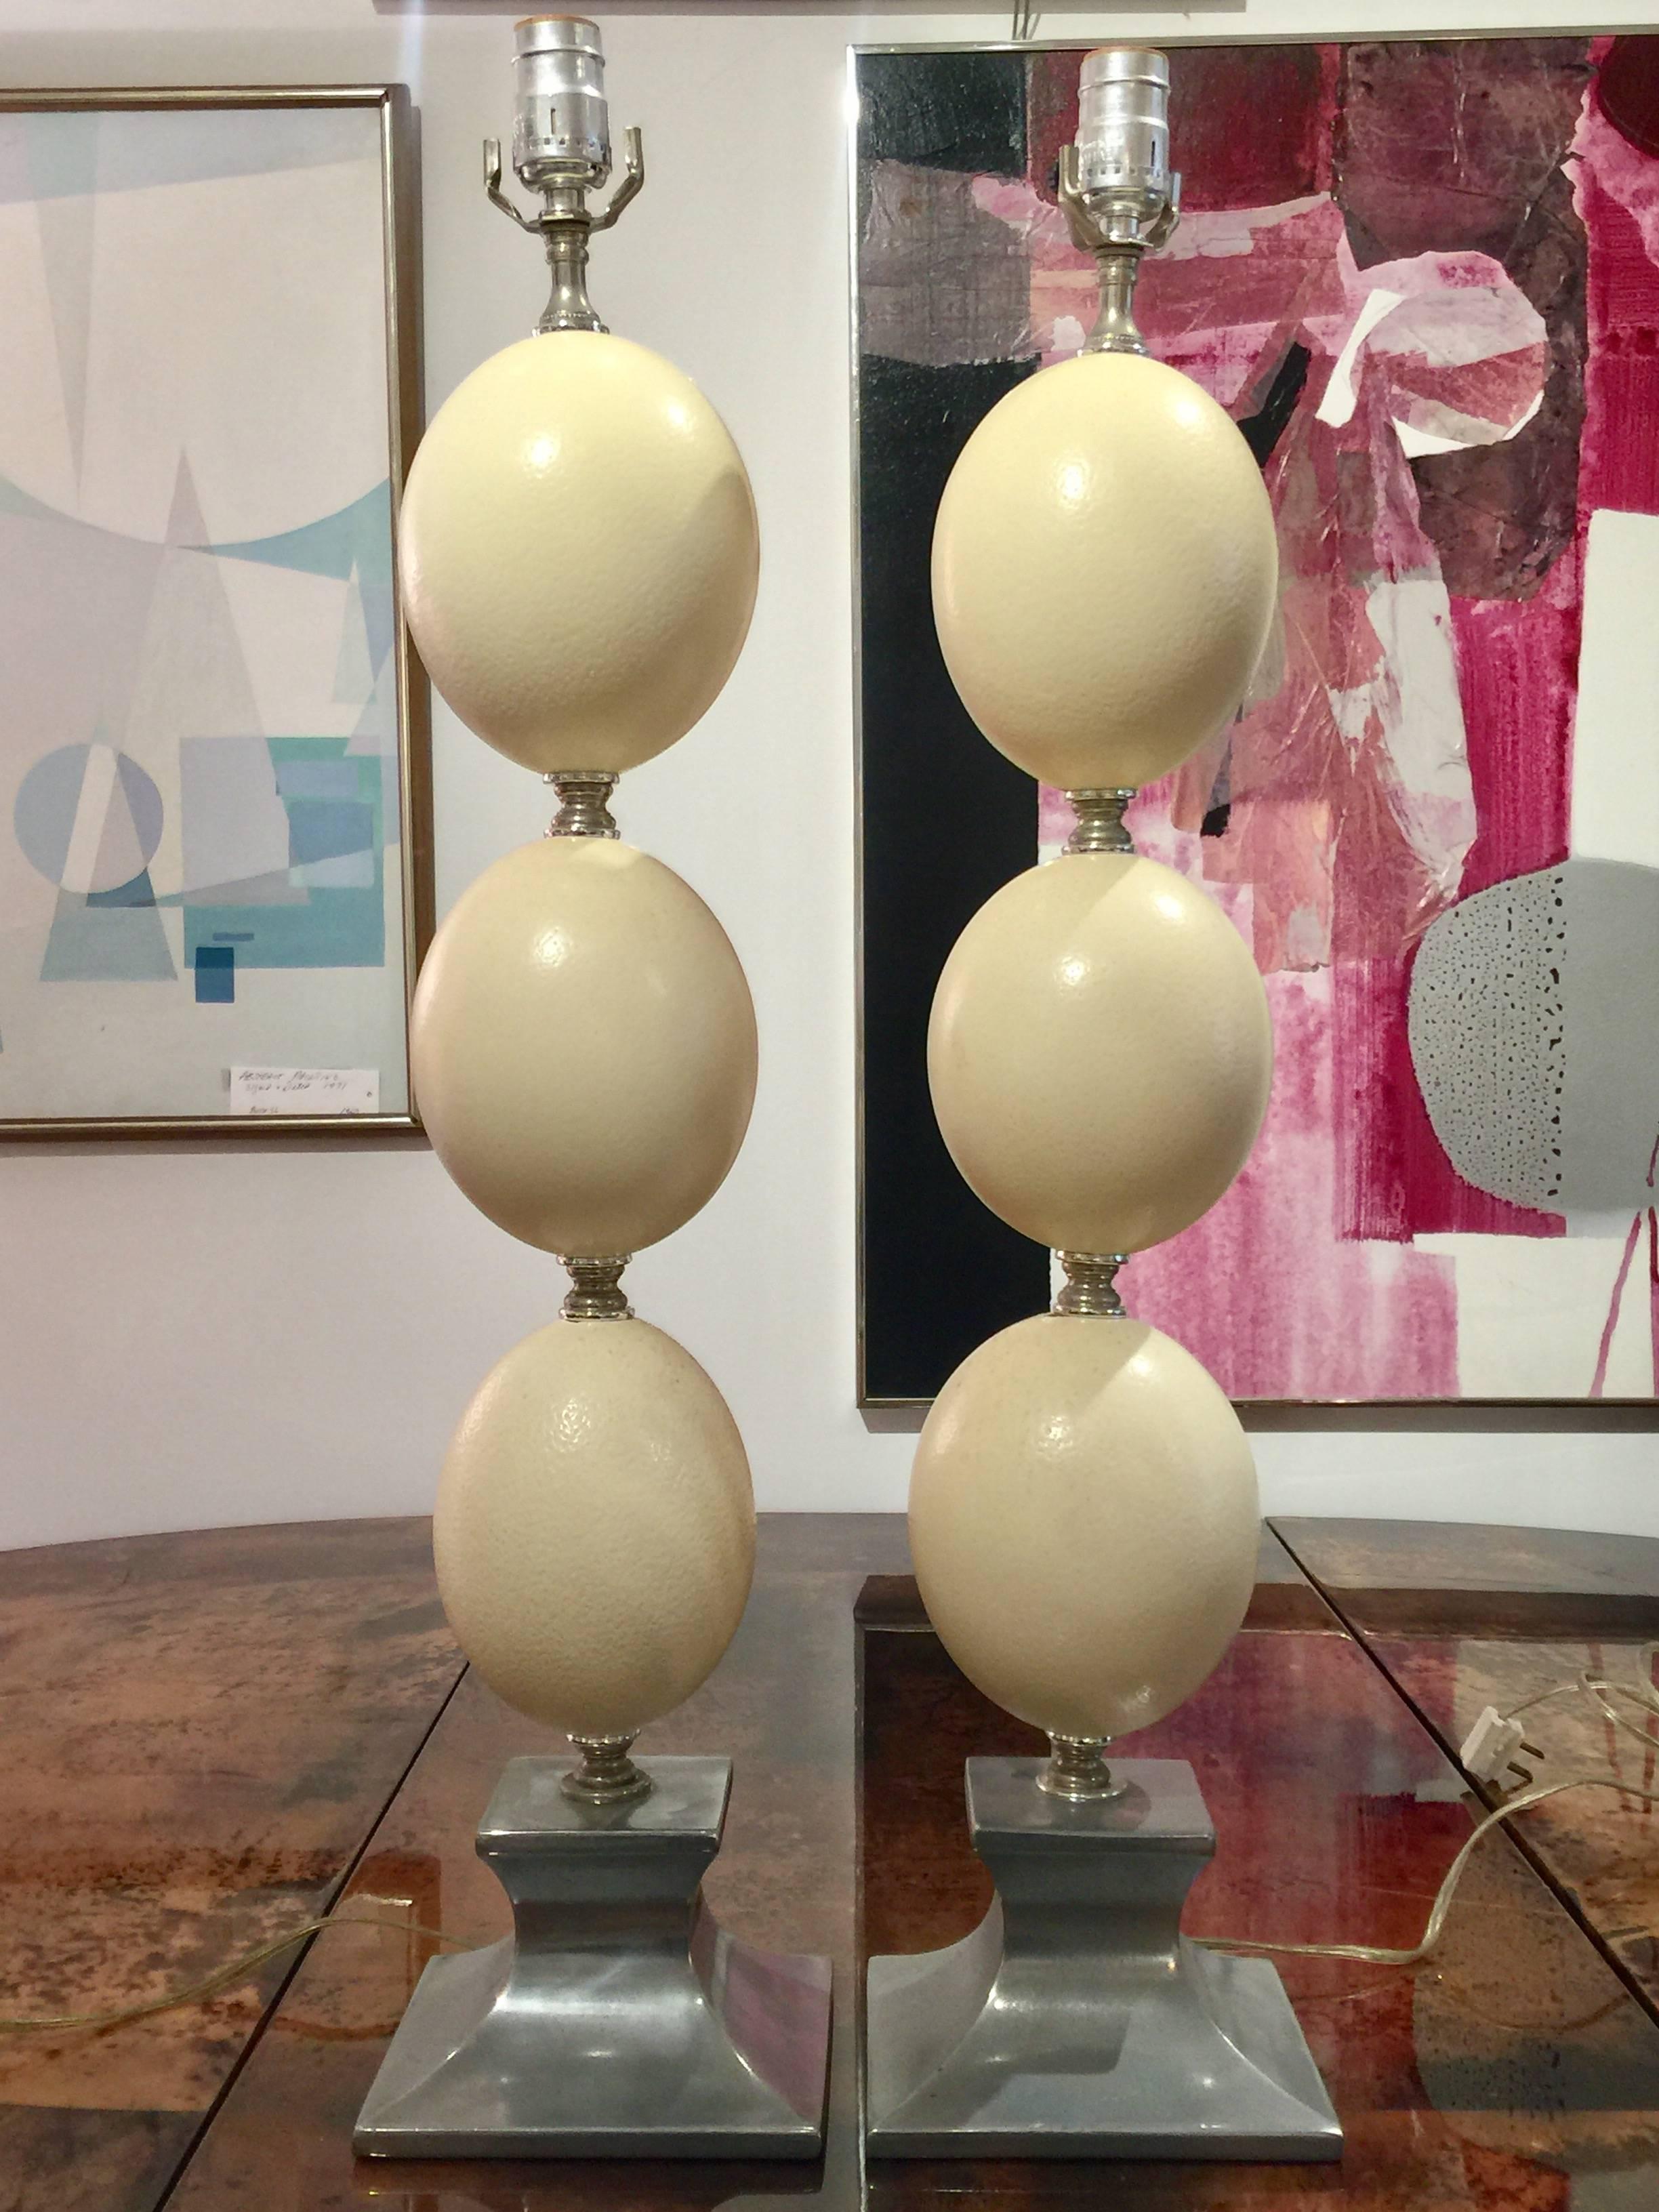 A pair of ostrich egg and silverate lamps attributed to Anthony Redmile.
The lamps have an elegant simple design.
Great combination of materials and scaled beautifully.
Unsigned but the quality, materials use and design of these lamps certainly